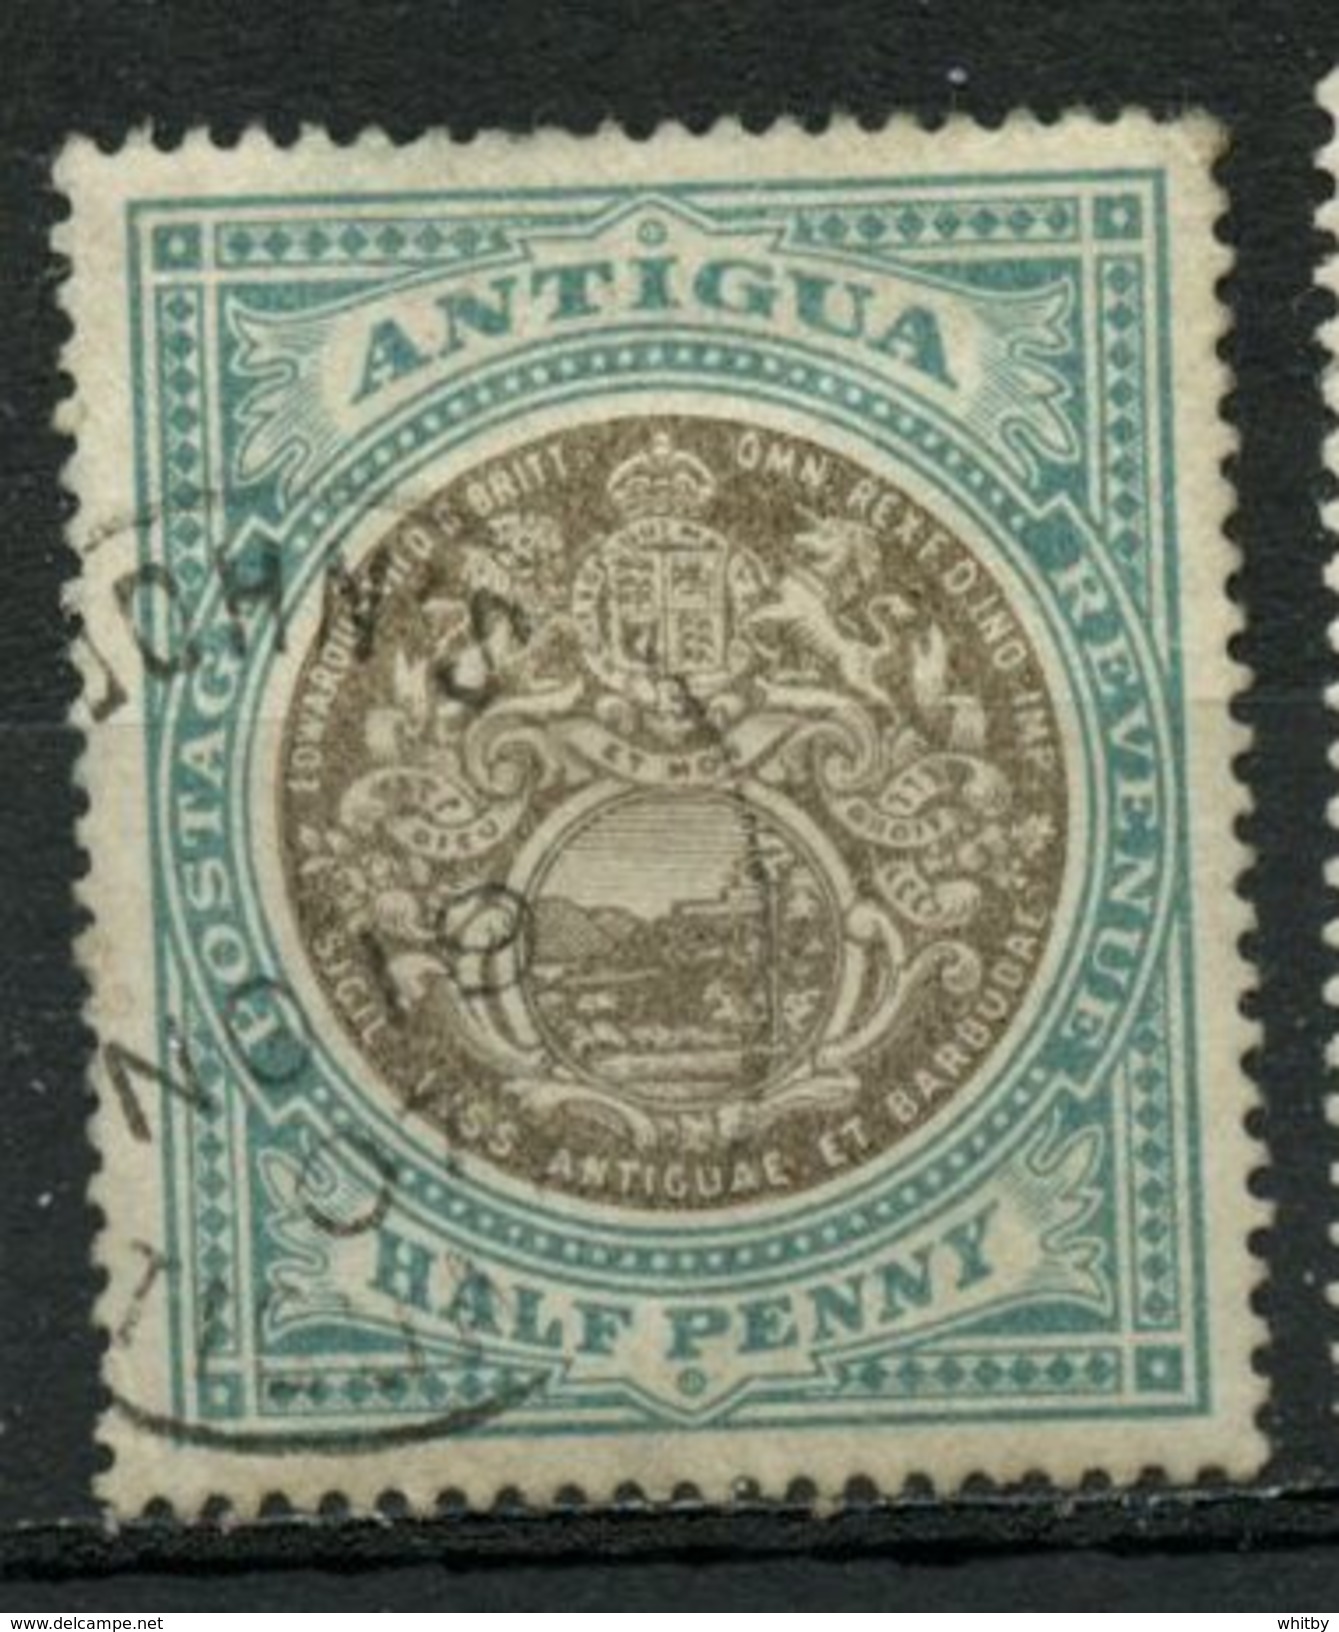 Antigua 1903 1/2p Seal Issue  #21 - 1858-1960 Crown Colony